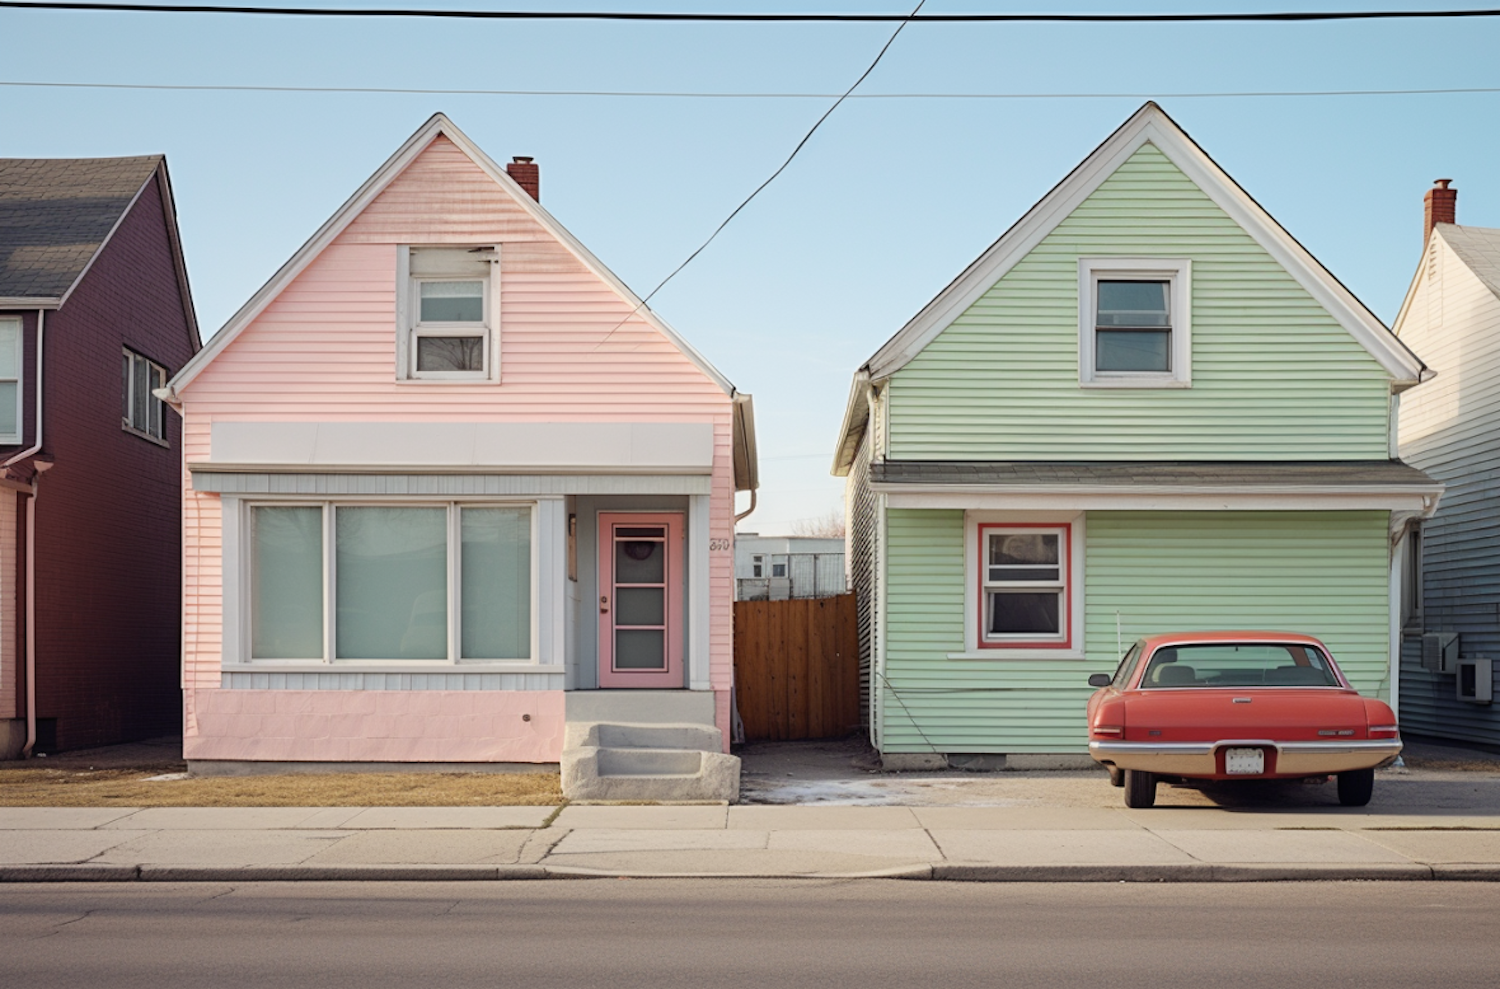 Pastel Suburbia with Vintage Red Car